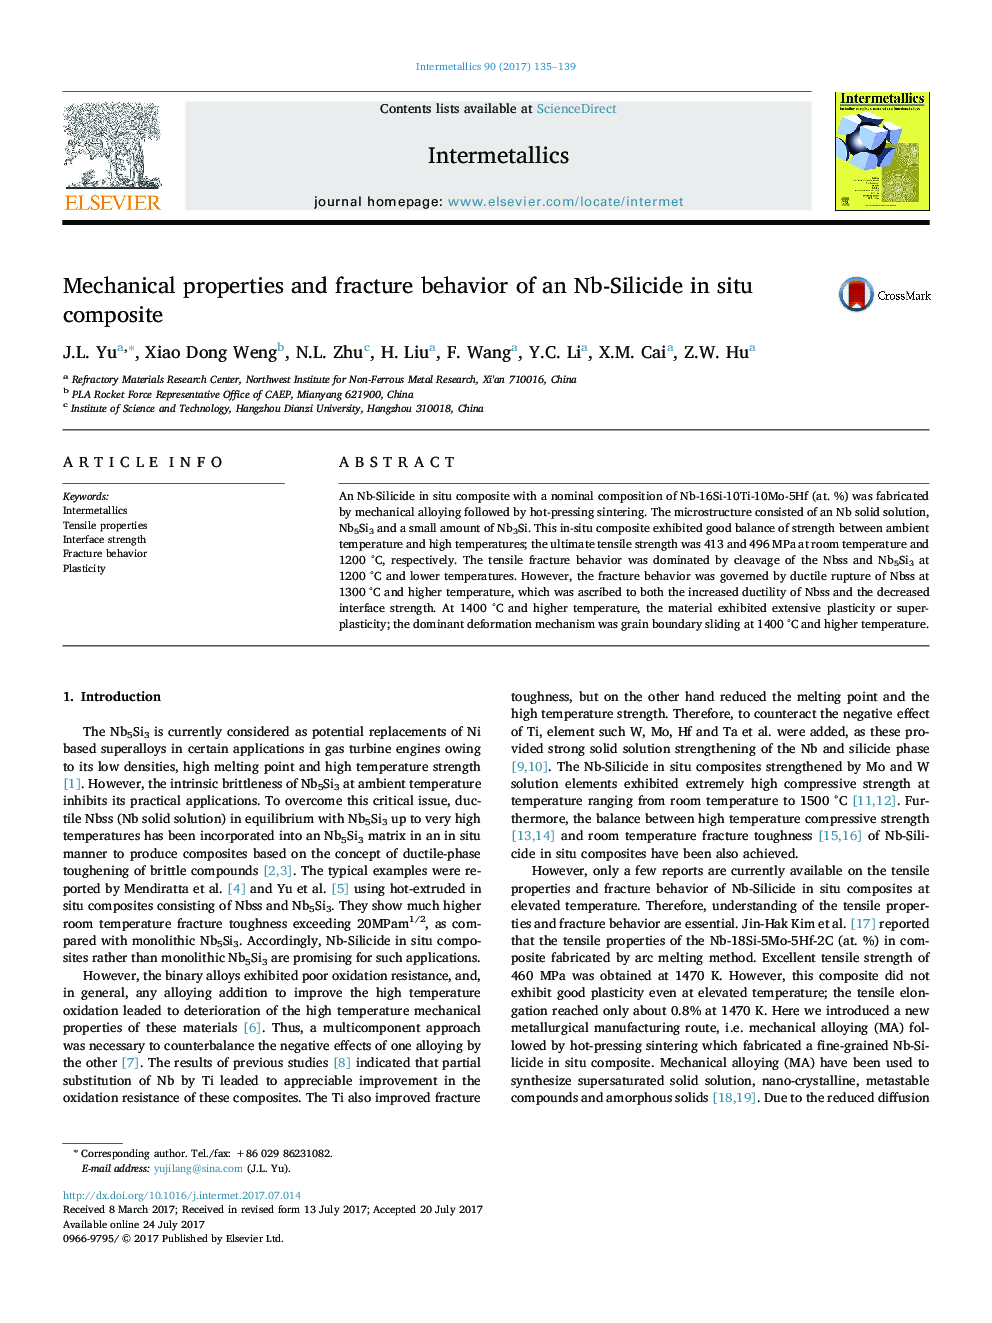 Mechanical properties and fracture behavior of an Nb-Silicide in situ composite